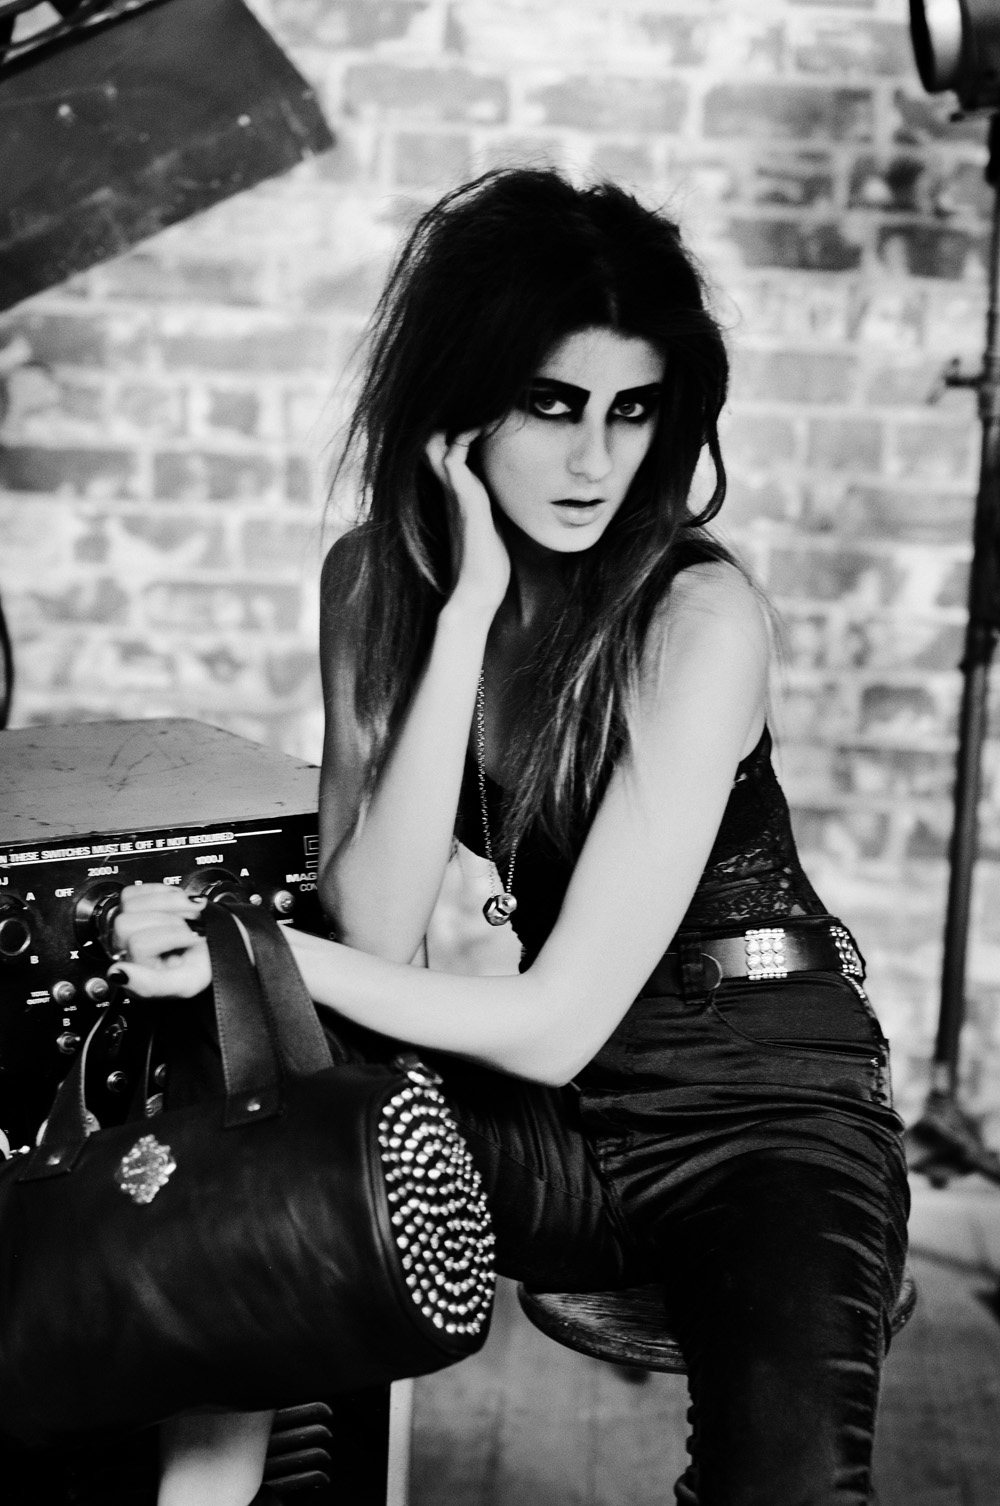 Sydney fashion model photographed with Tank bag in black and white. Biker fashion inspired handbag branding campaign. Photography by Kent Johnson.